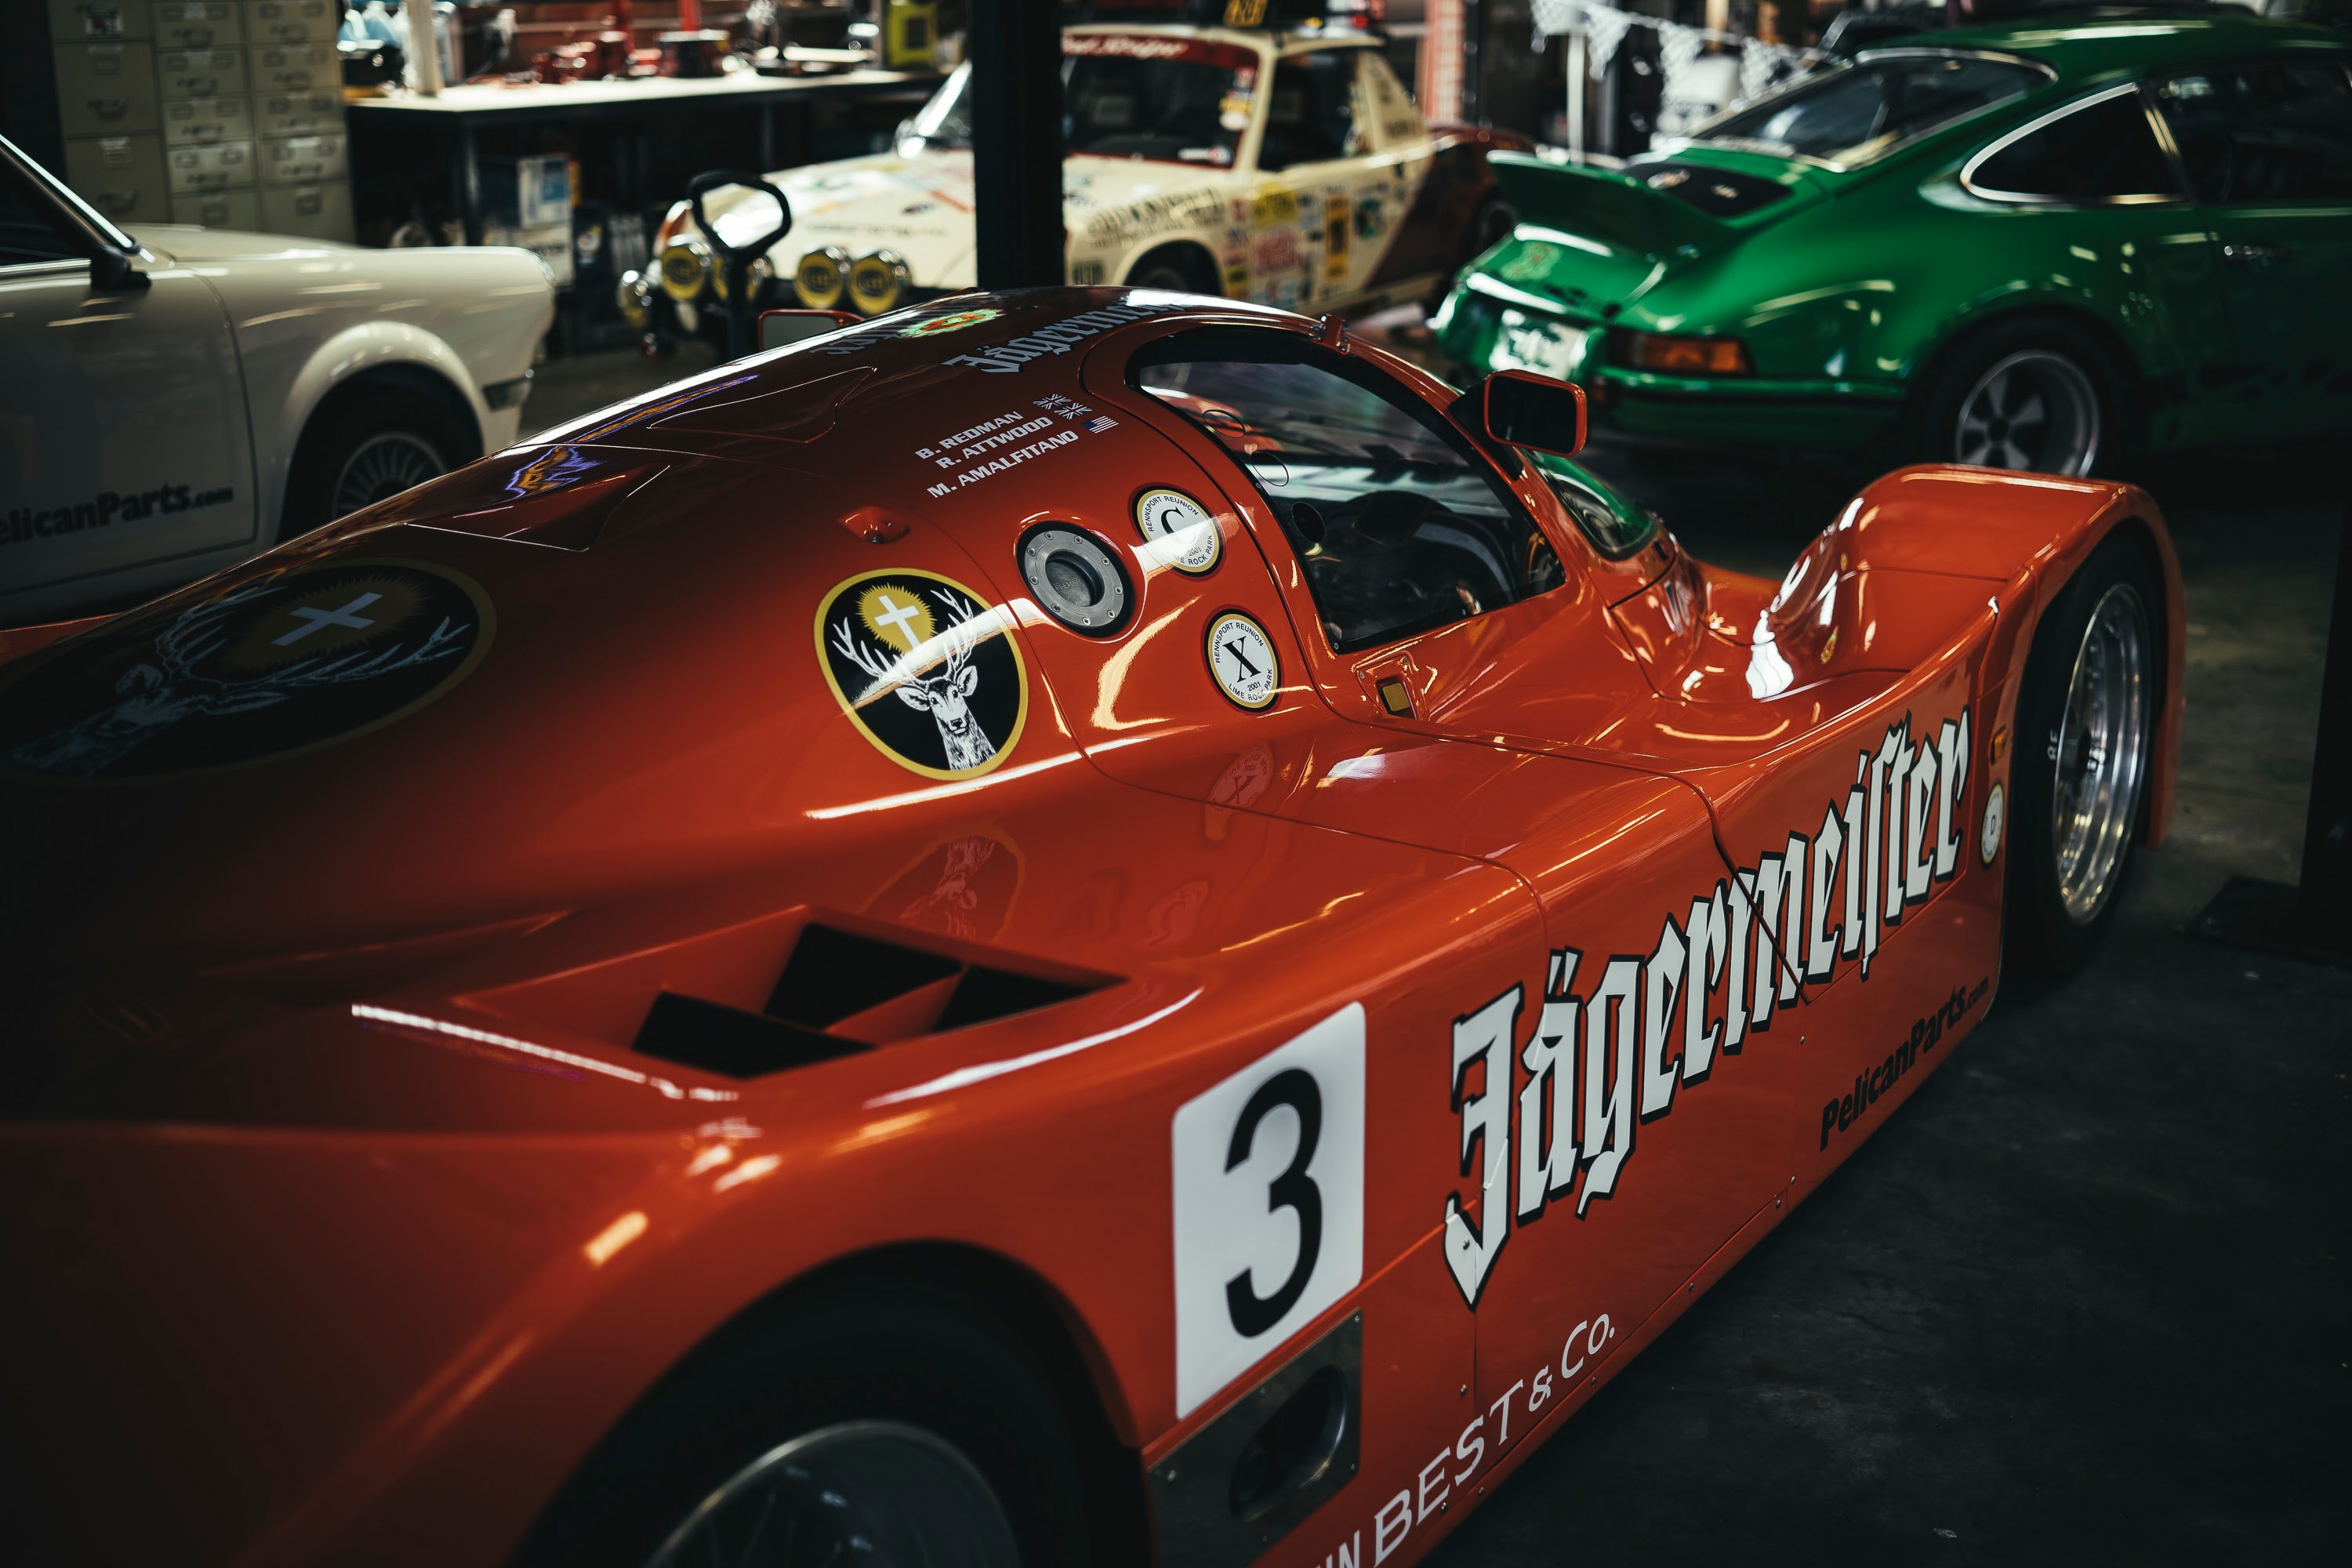 The Jagermeister 962 race car number 3.